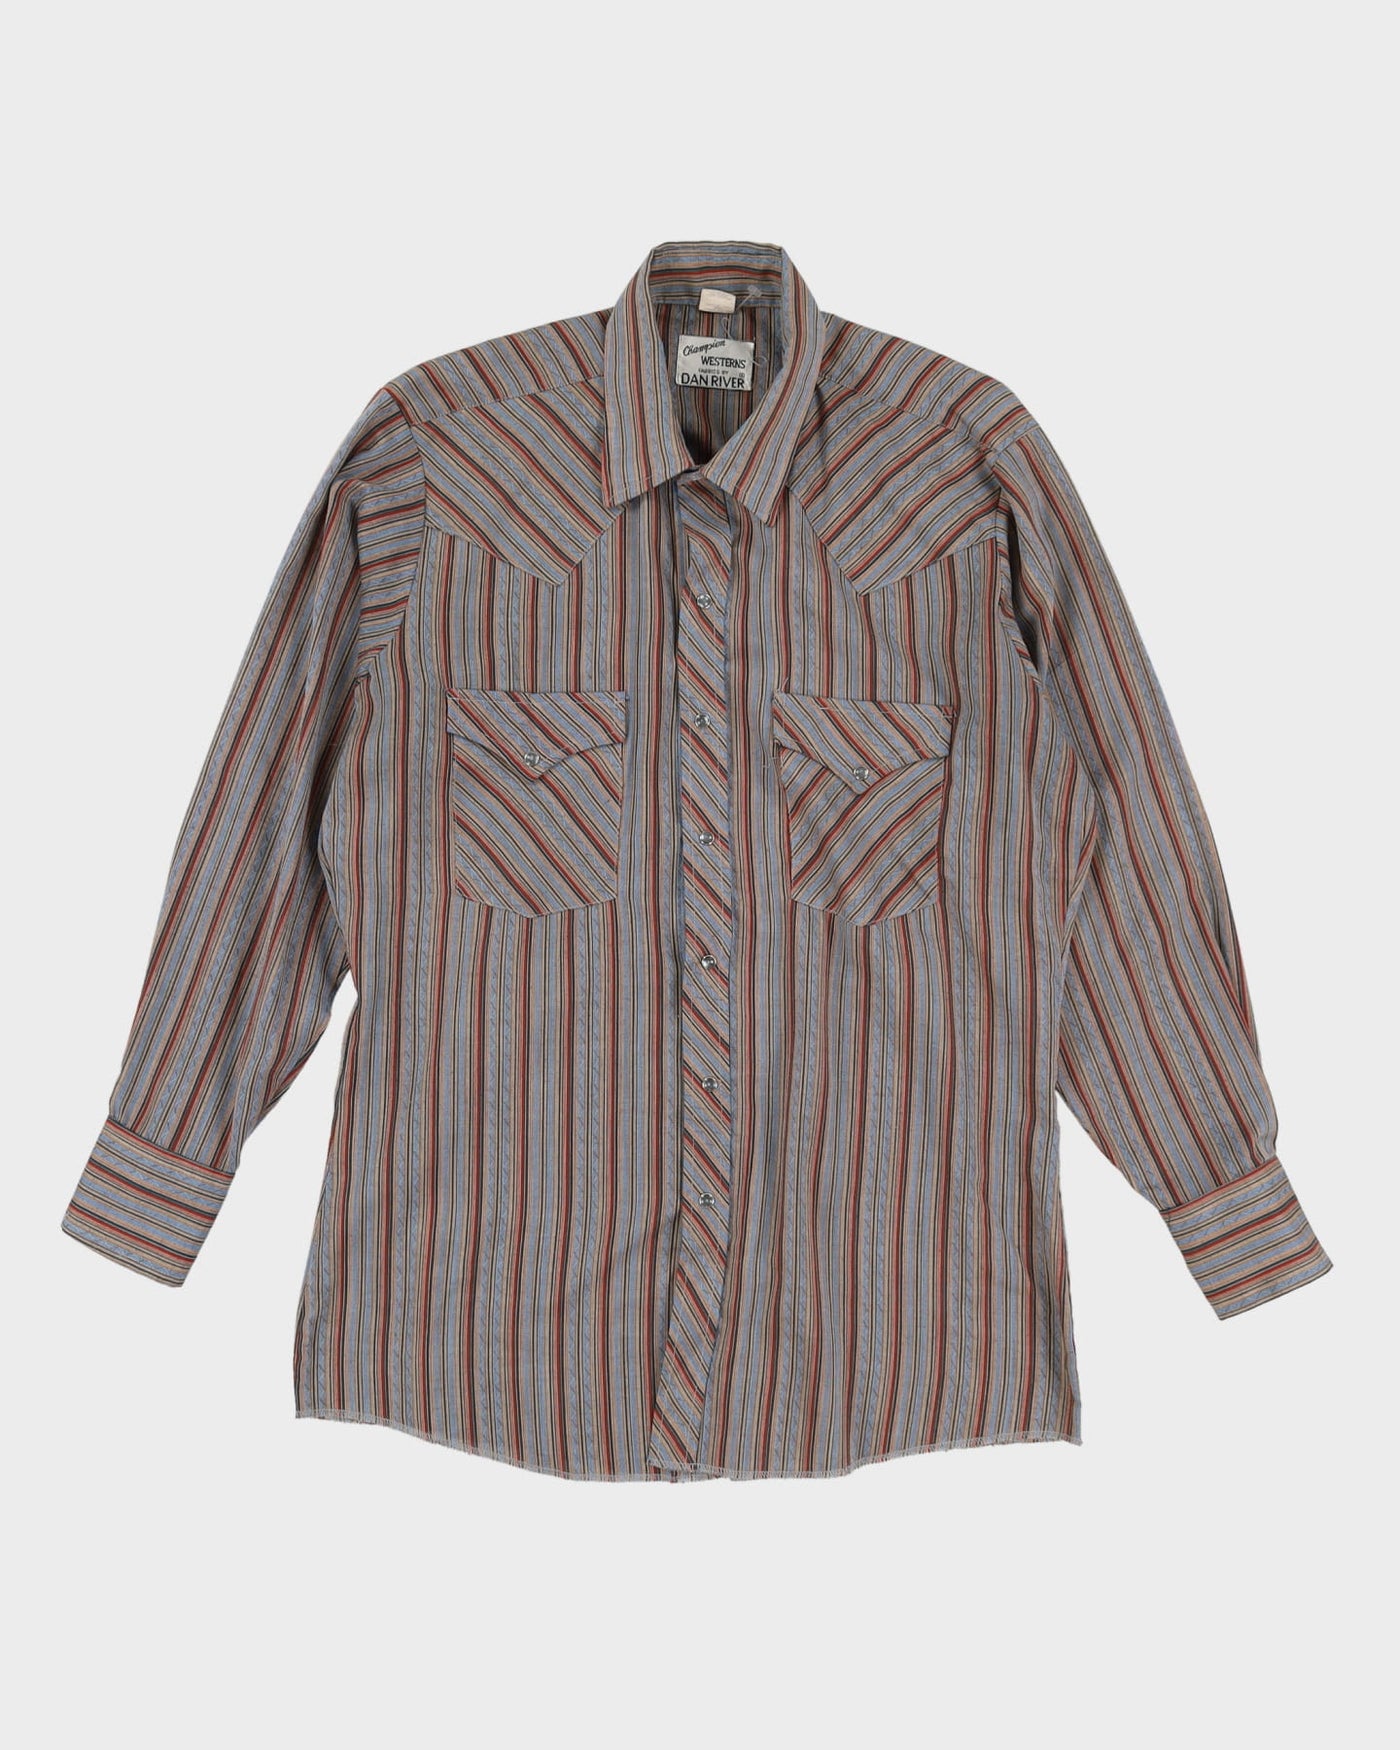 80s Champion Western Long-Sleeve Button-Up Shirt - L